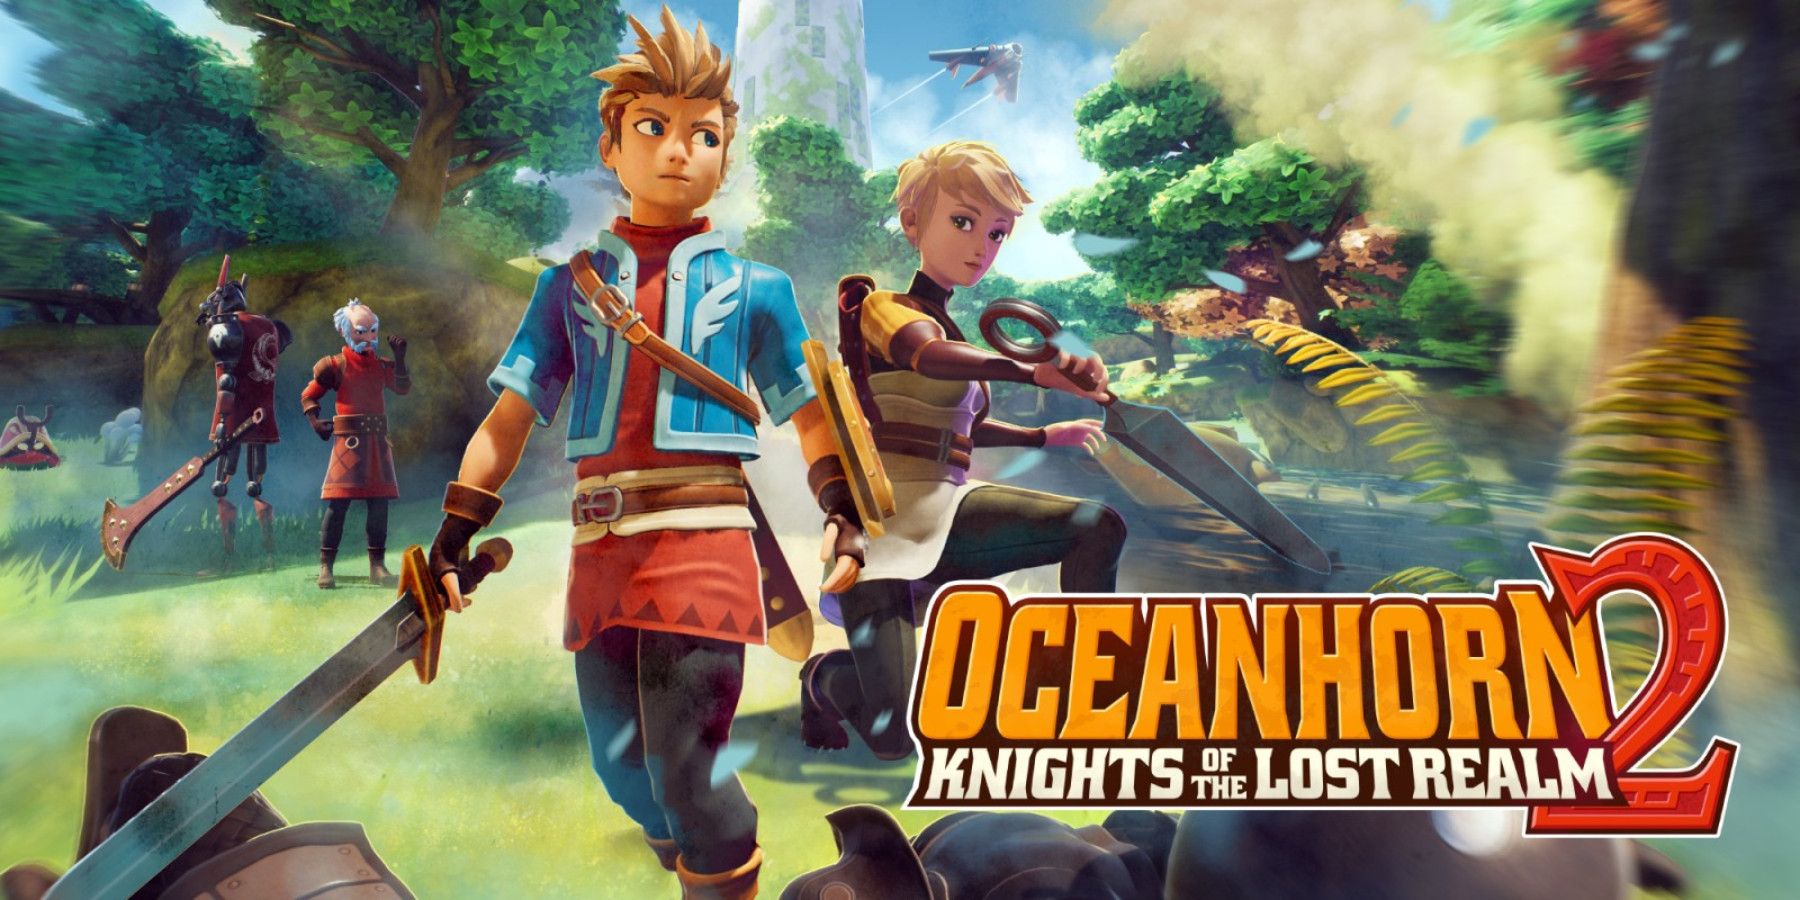 Oceanhorn 2 Knights Of The Lost Realm Apple Arcade RPG